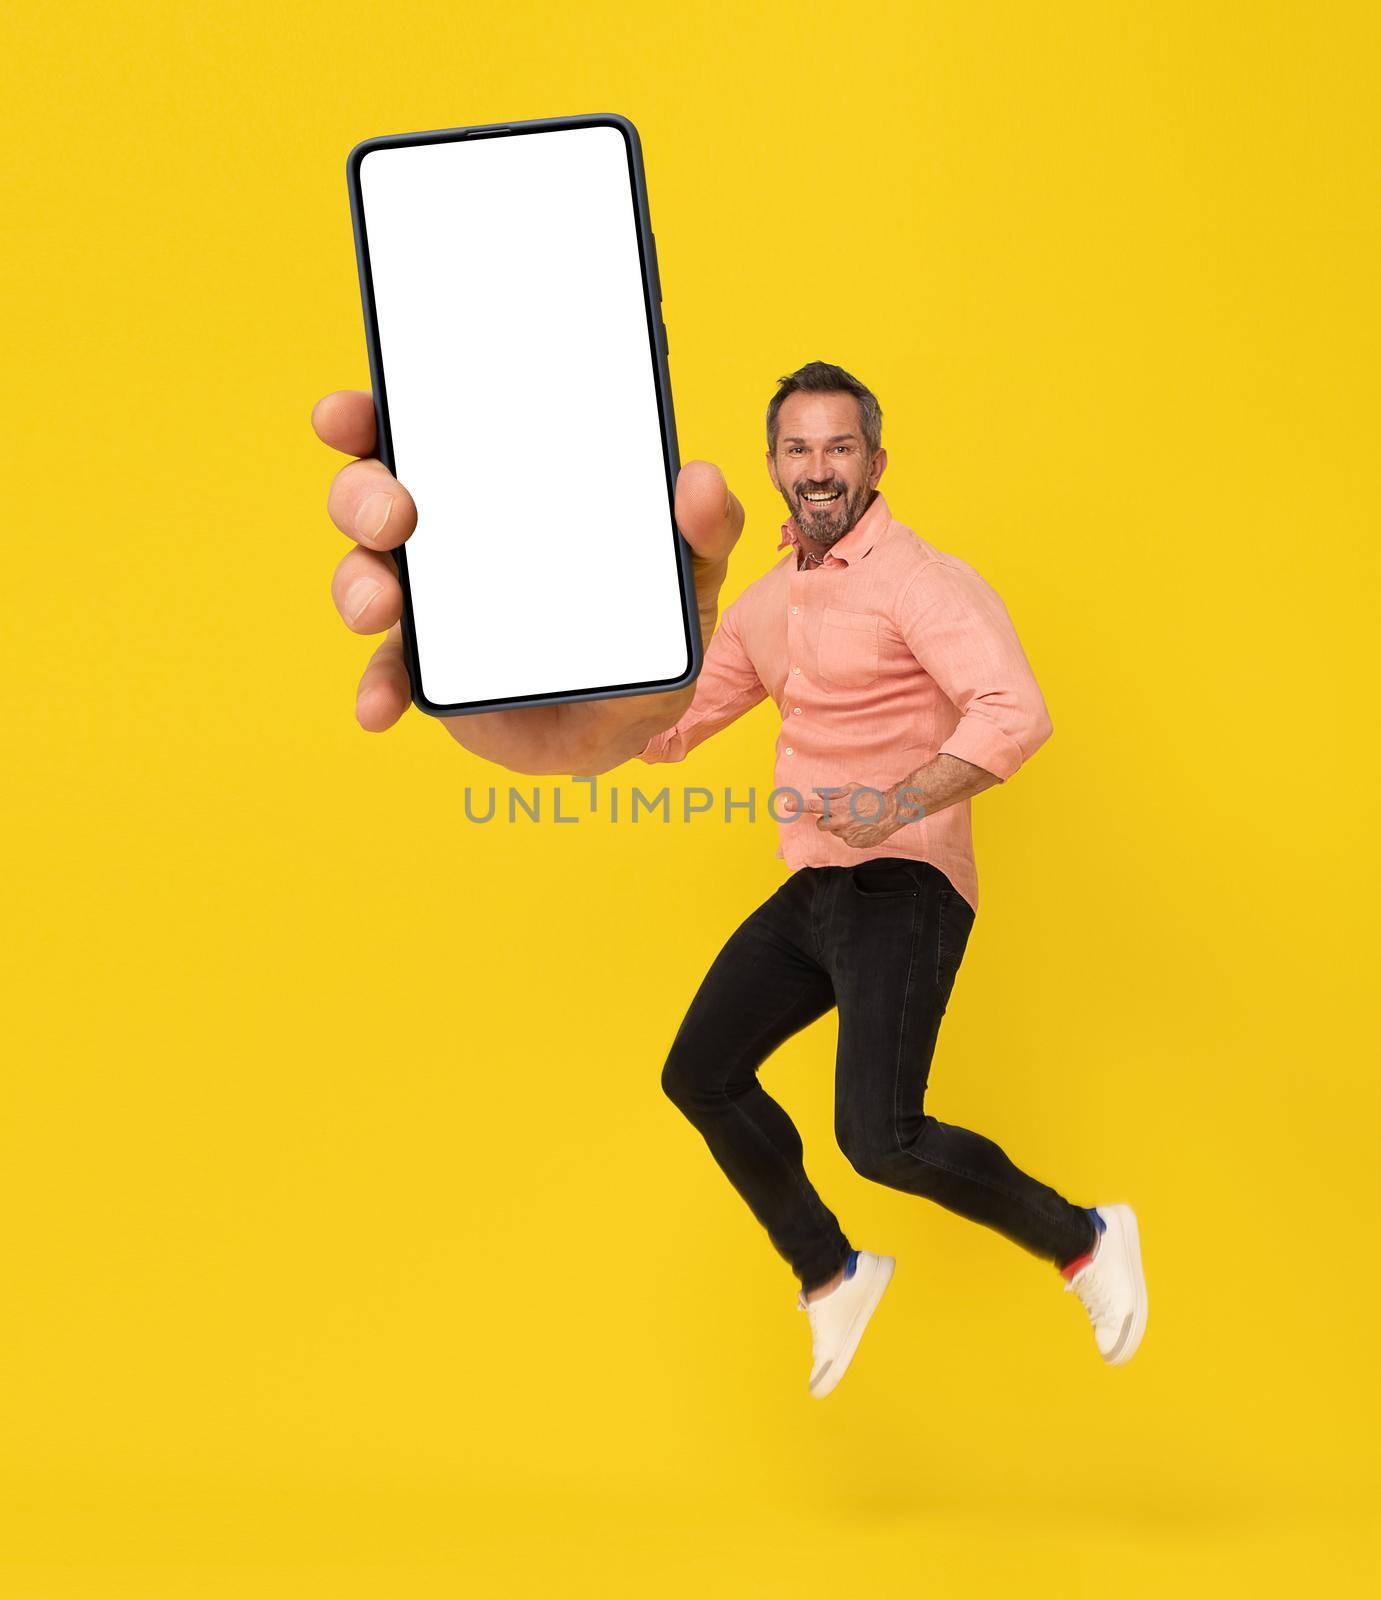 Excited middle aged man 40s jump with smartphone with white screen in hand happy smiling on camera wearing peach shirt and black jeans isolated on yellow background. Mobile app advertisement by LipikStockMedia